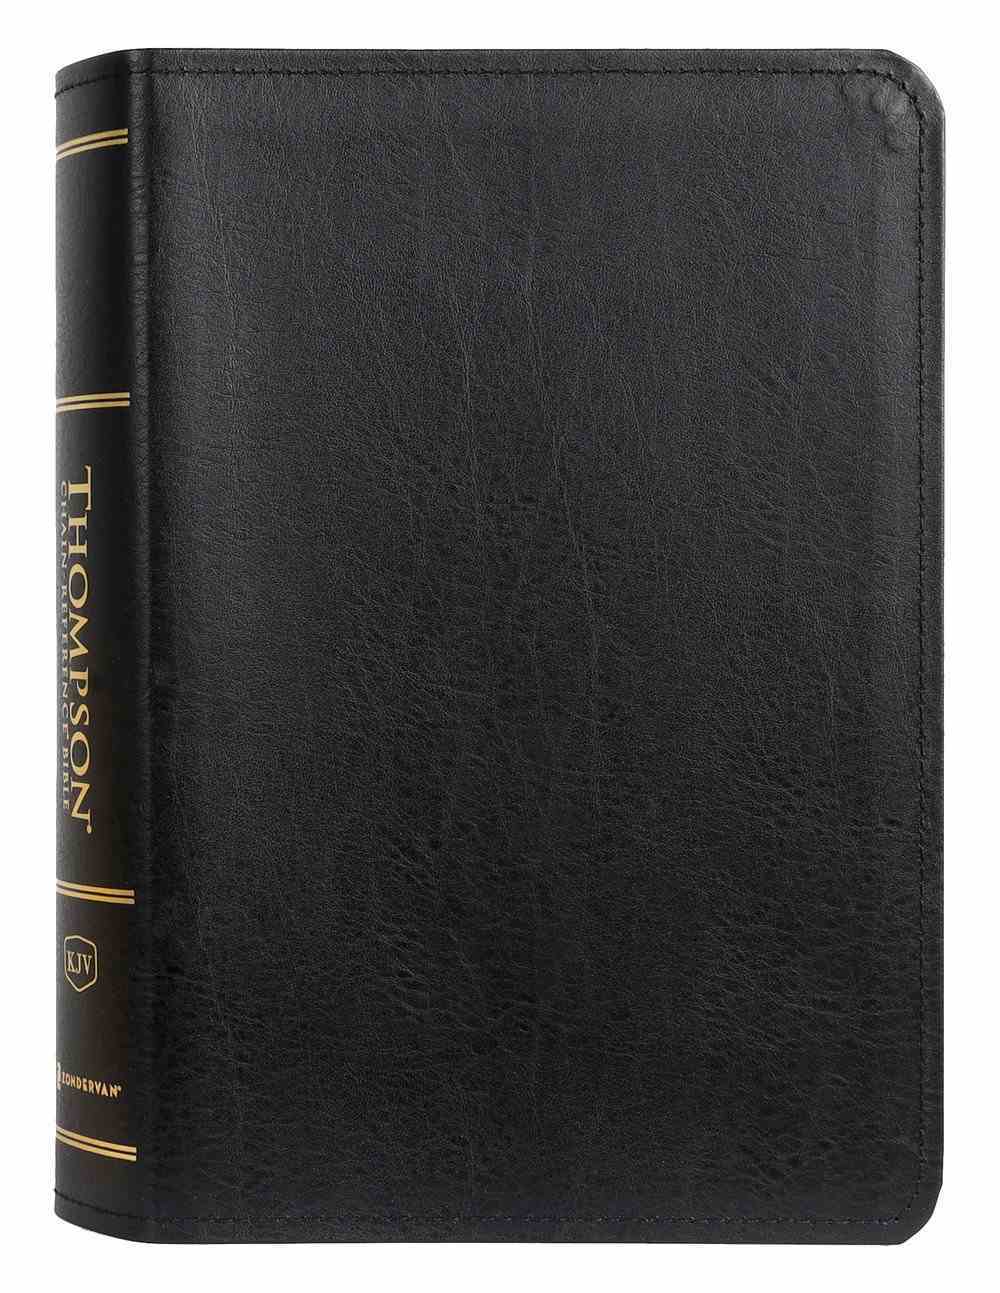 KJV Thompson Chain-Reference Bible Handy Size Black (Red Letter Edition) Bonded Leather